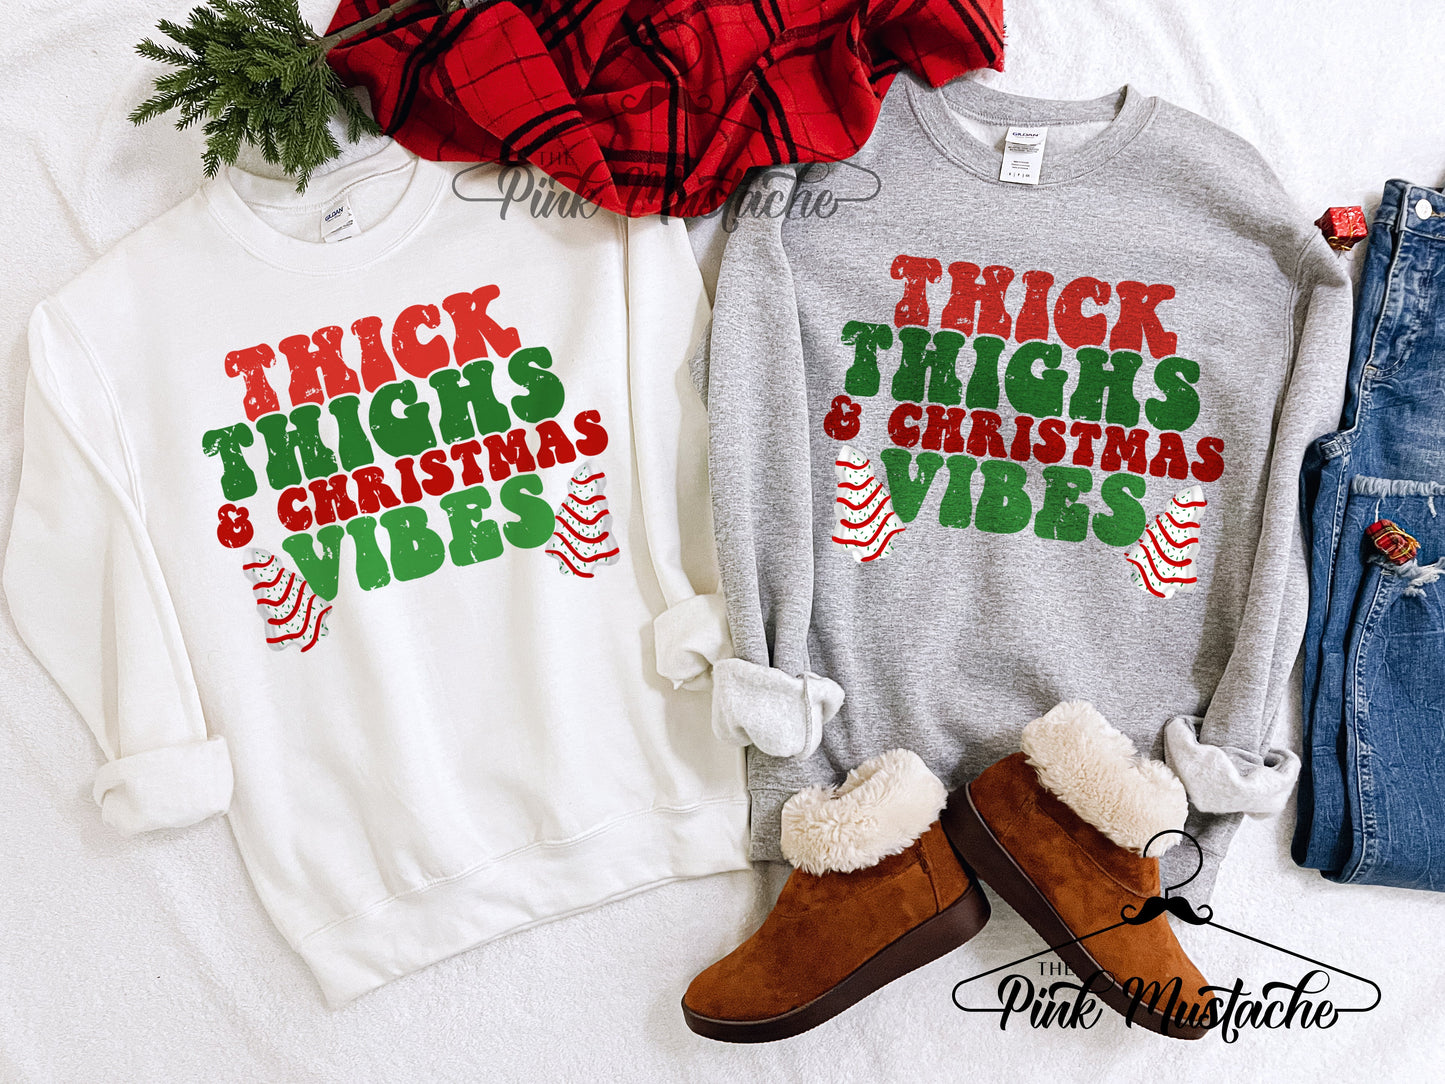 Thick Thighs and Christmas Vibes Yummy Christmas Trees Sweatshirt/ Super Cute Unisex Sized Sweatshirt/ Youth and Adult Options